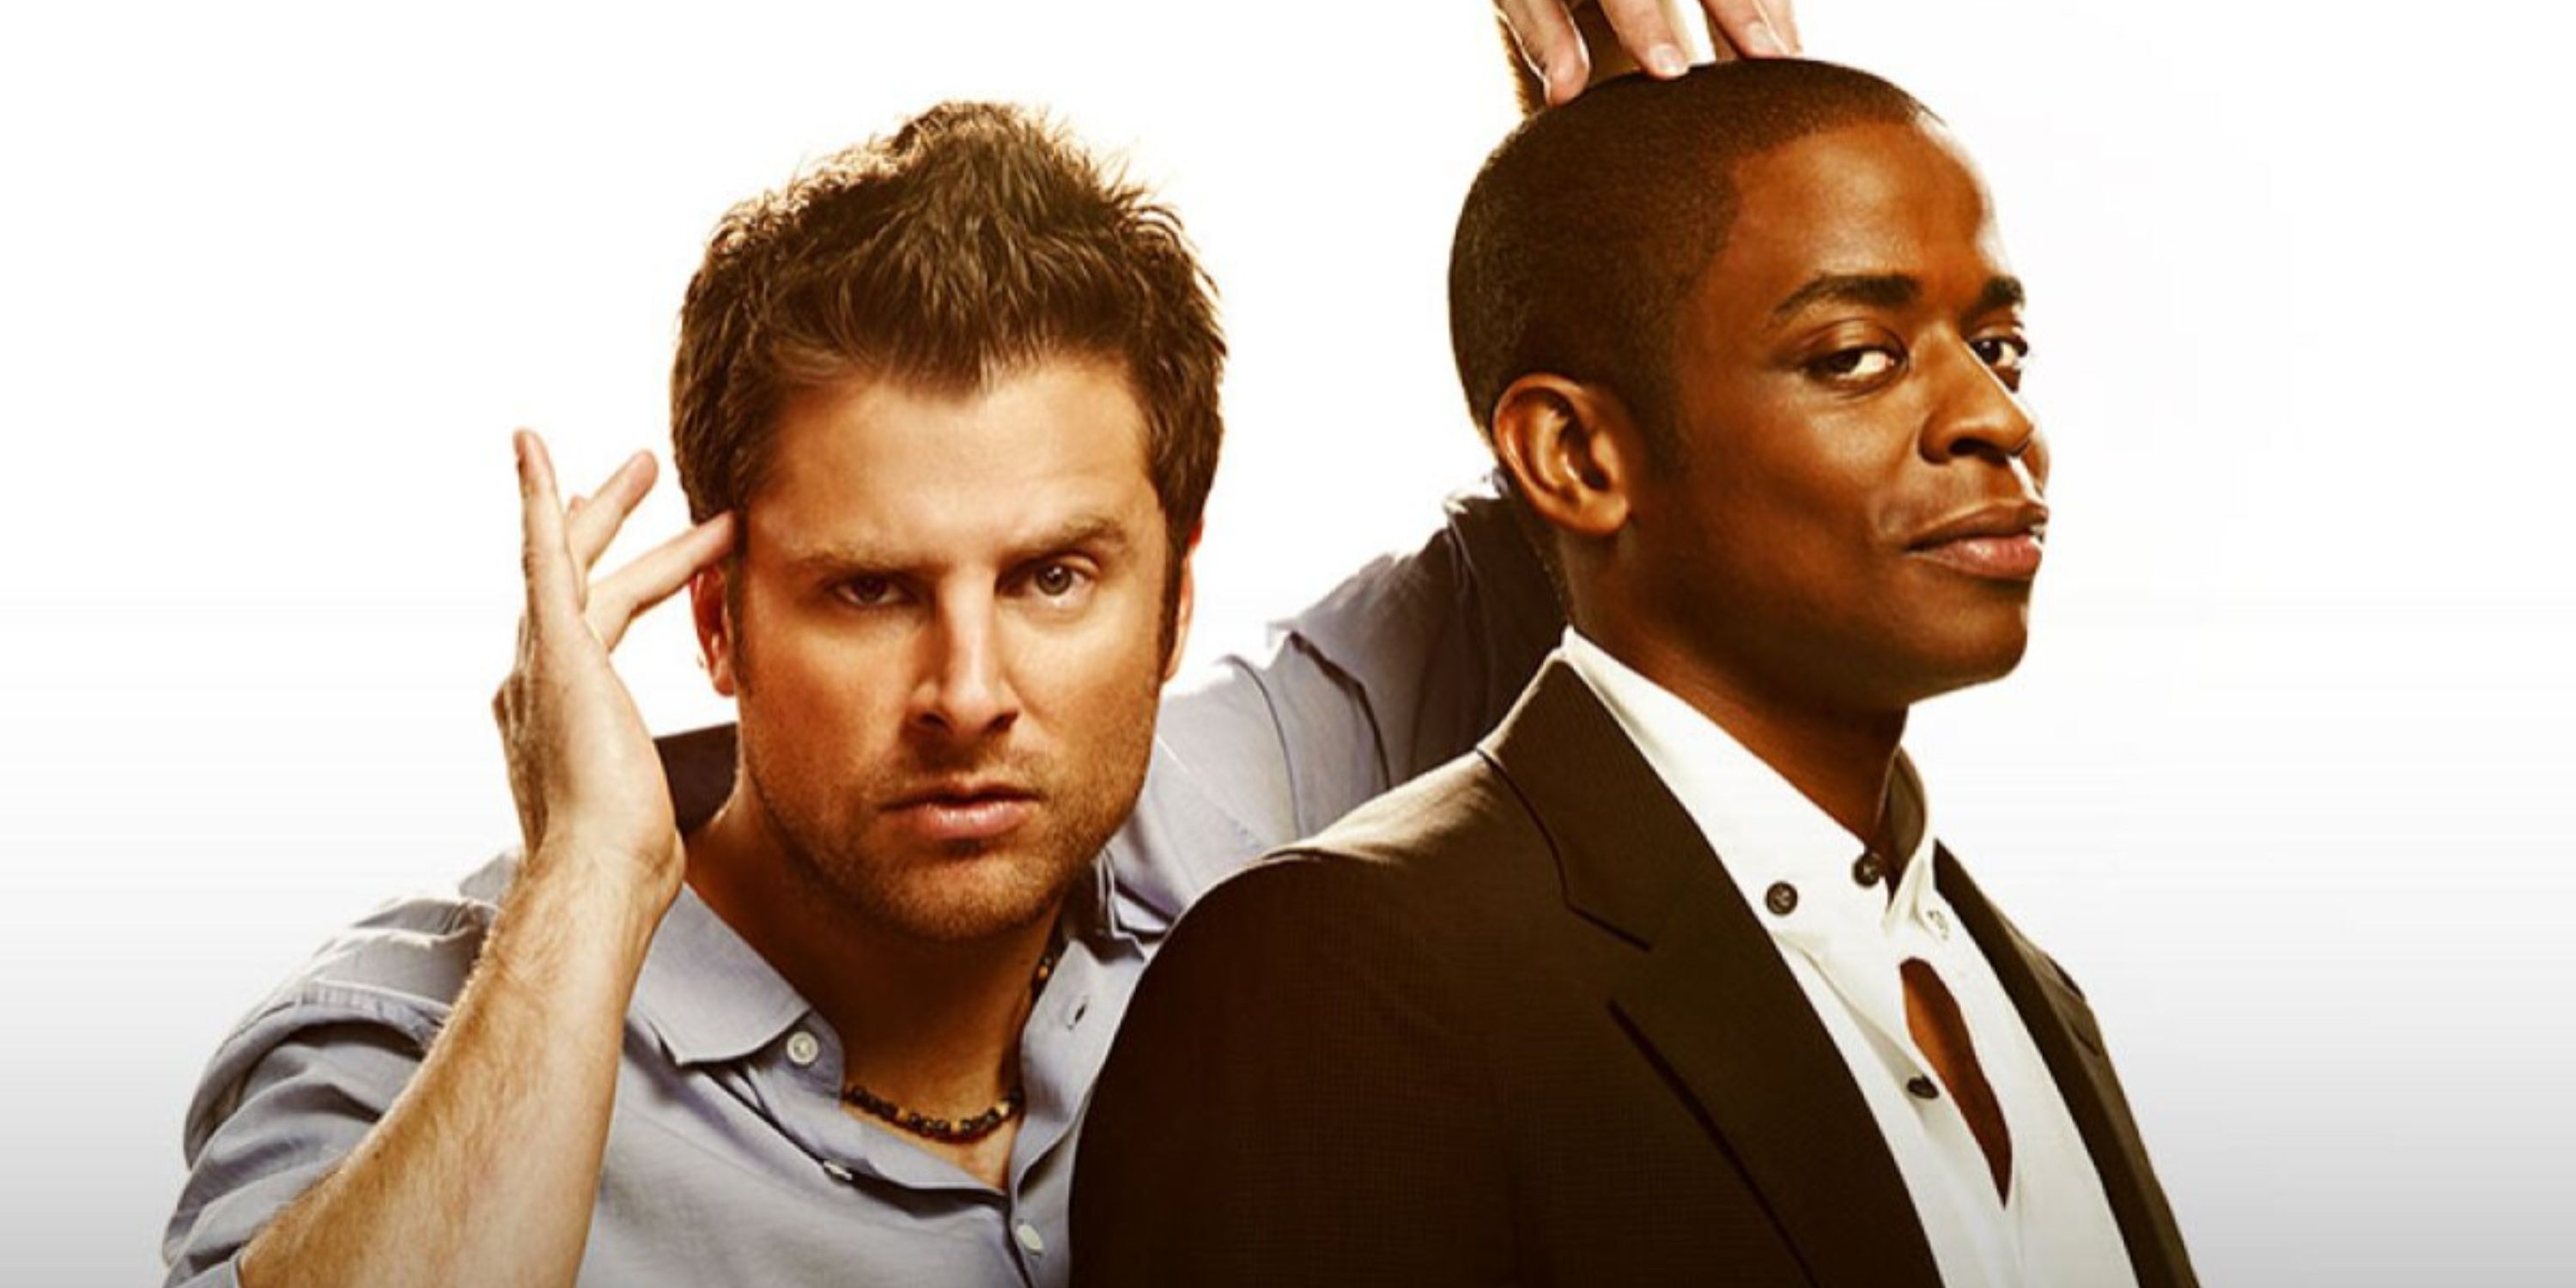 Shawn Spencer (James Roday) and Burton Gus Guster (Dulé Hill)